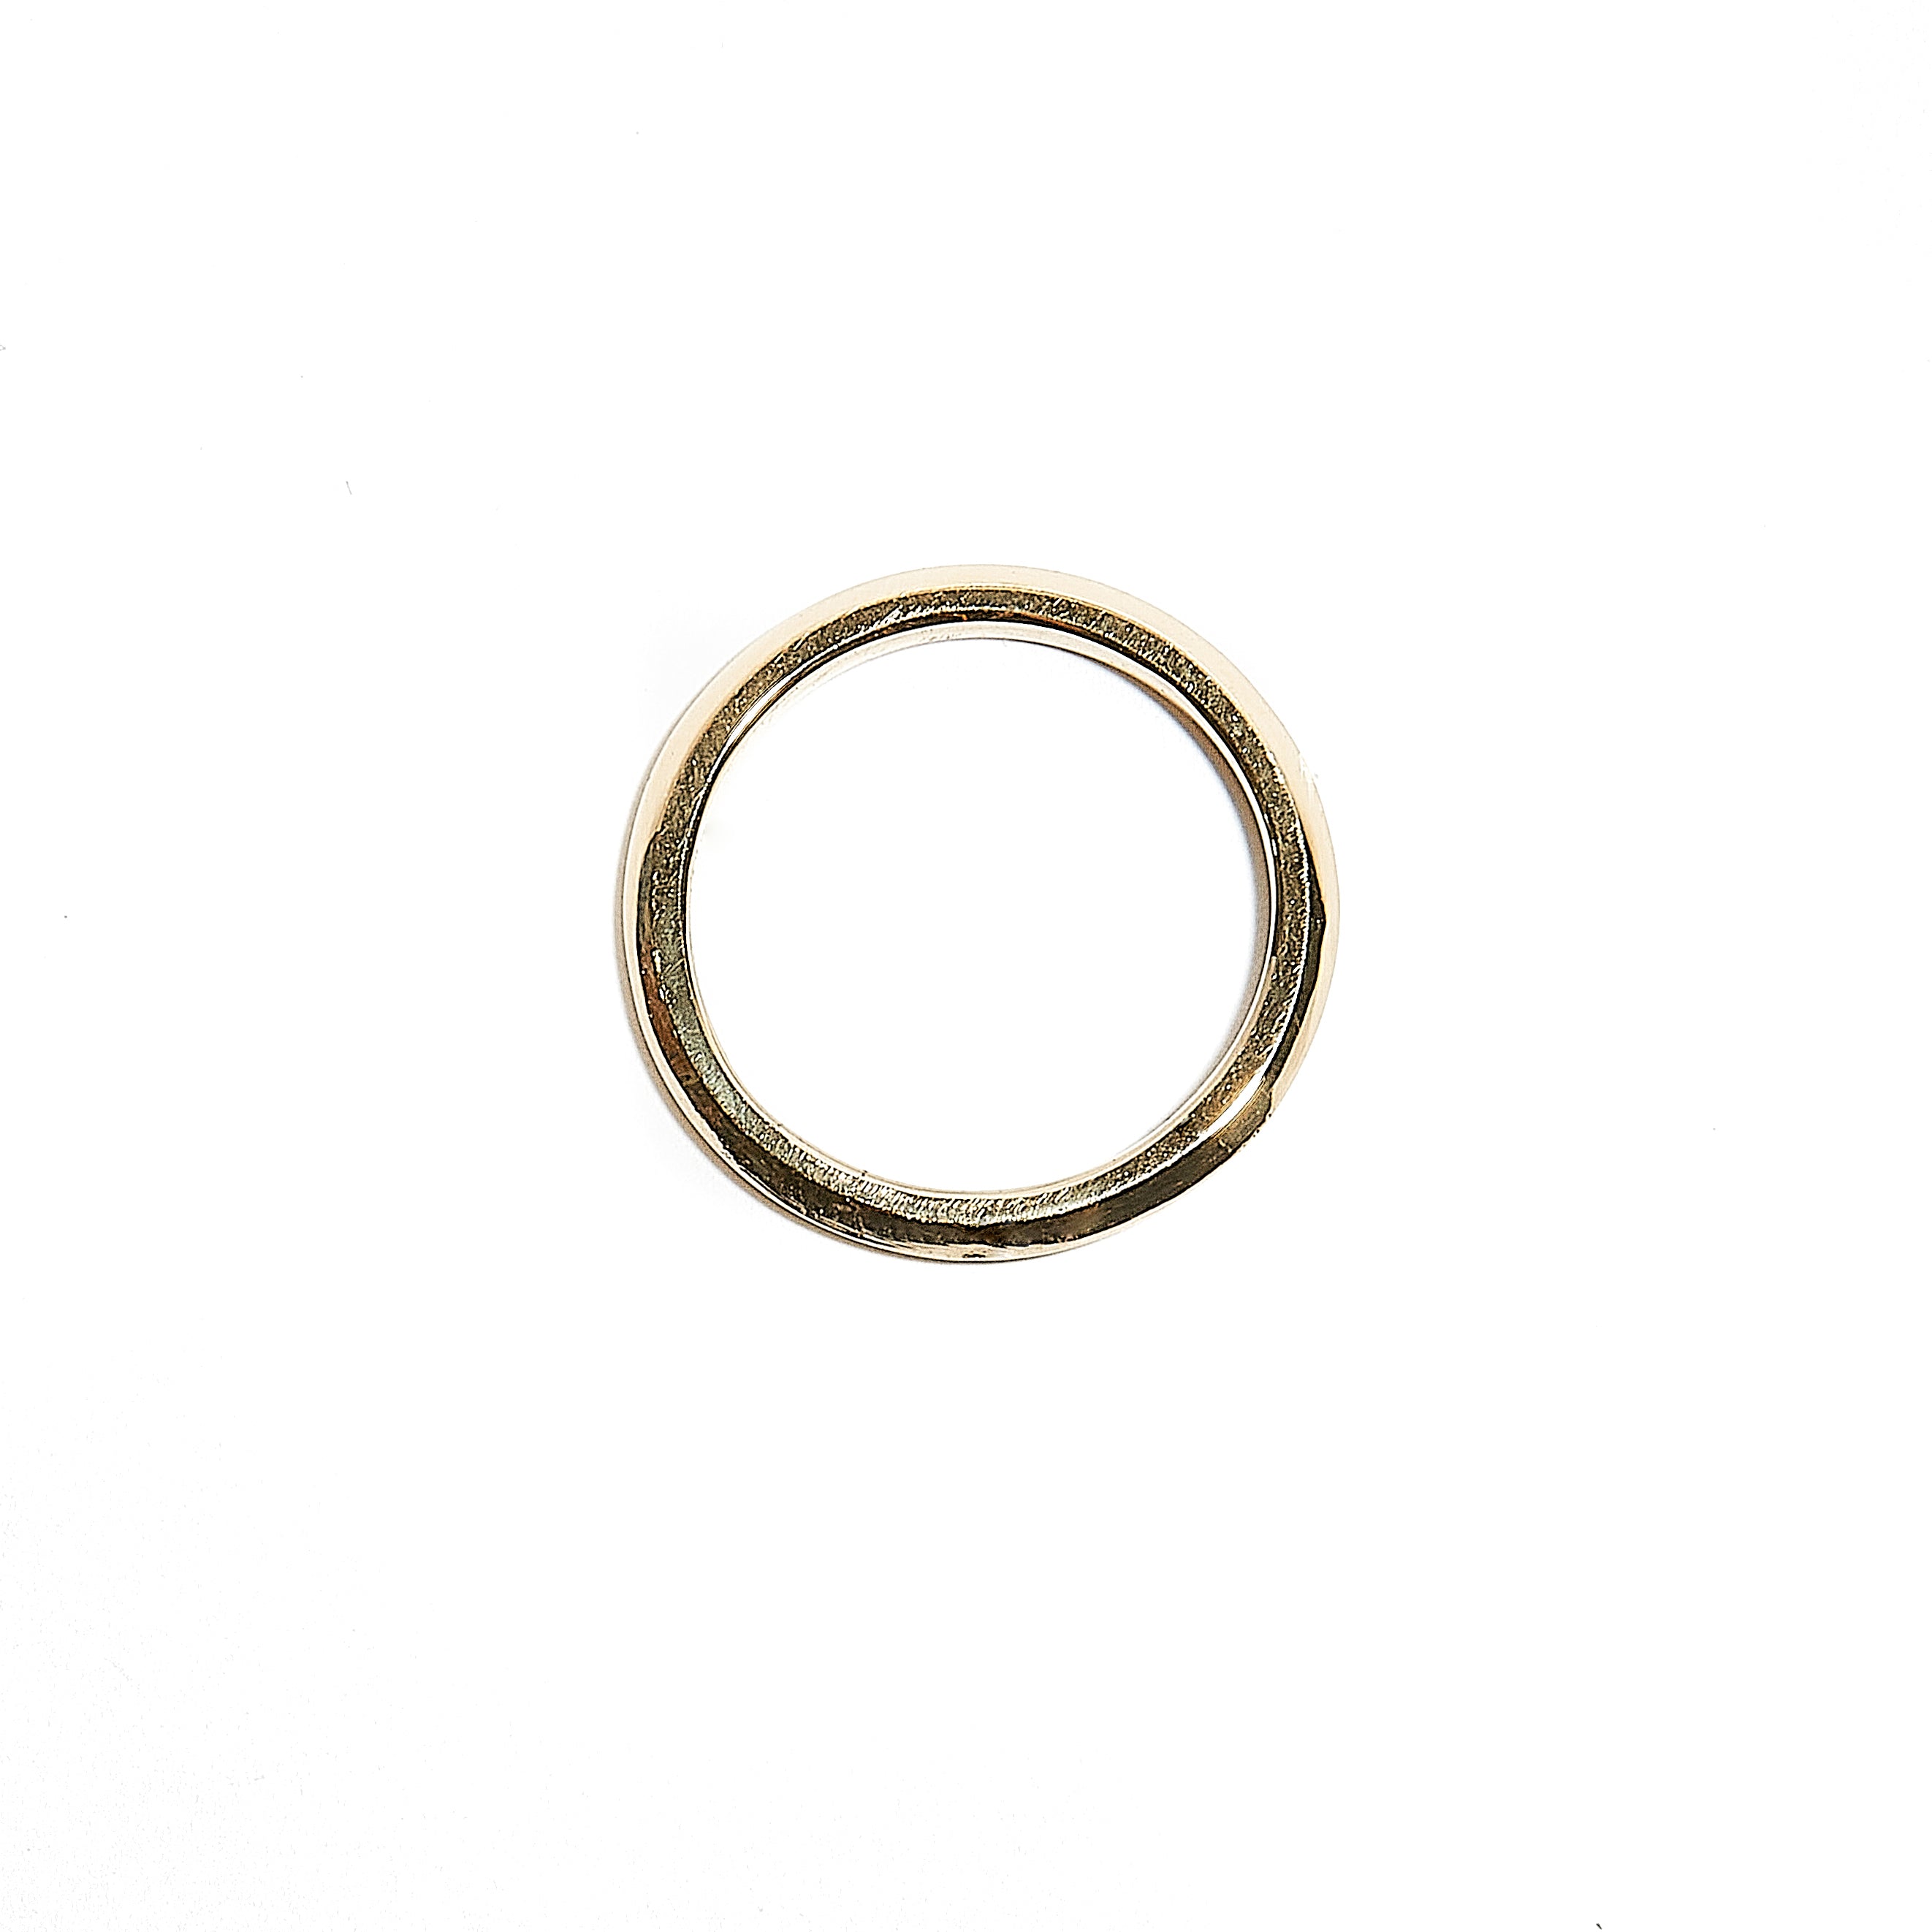 DIVINE: Yellow Gold Knife Edge Ring